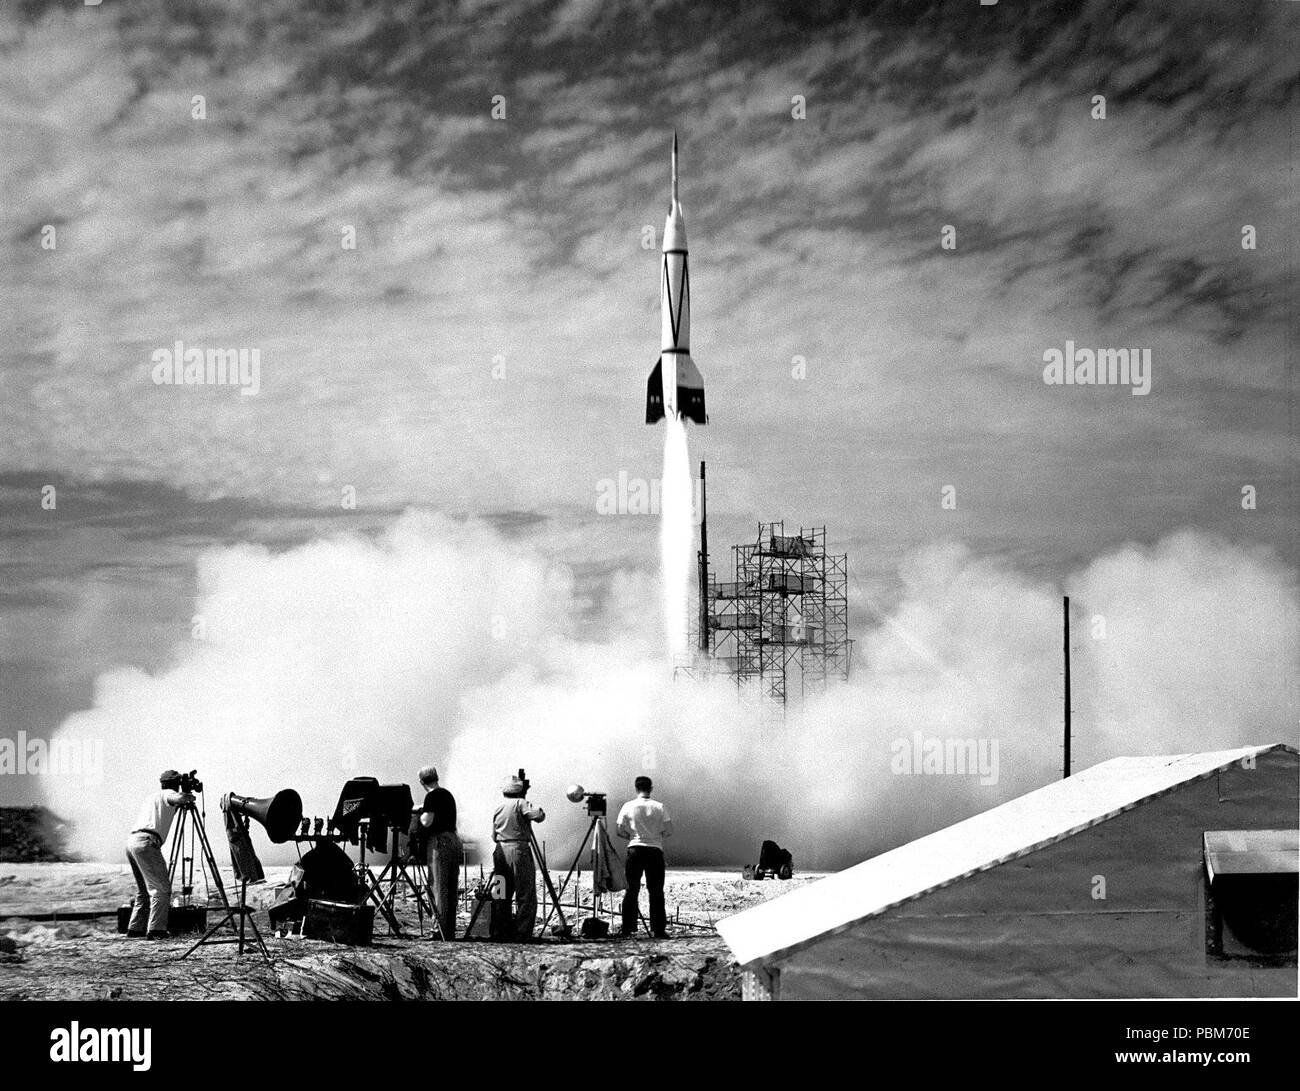 (July 24, 1950) A new chapter in space flight began in July 1950 with the launch of the first rocket from Cape Canaveral, Florida: the Bumper 8. Shown above, Bumper 8 was an ambitious two-stage rocket program that topped a V-2 missile base with a WAC Corporal rocket. Stock Photo